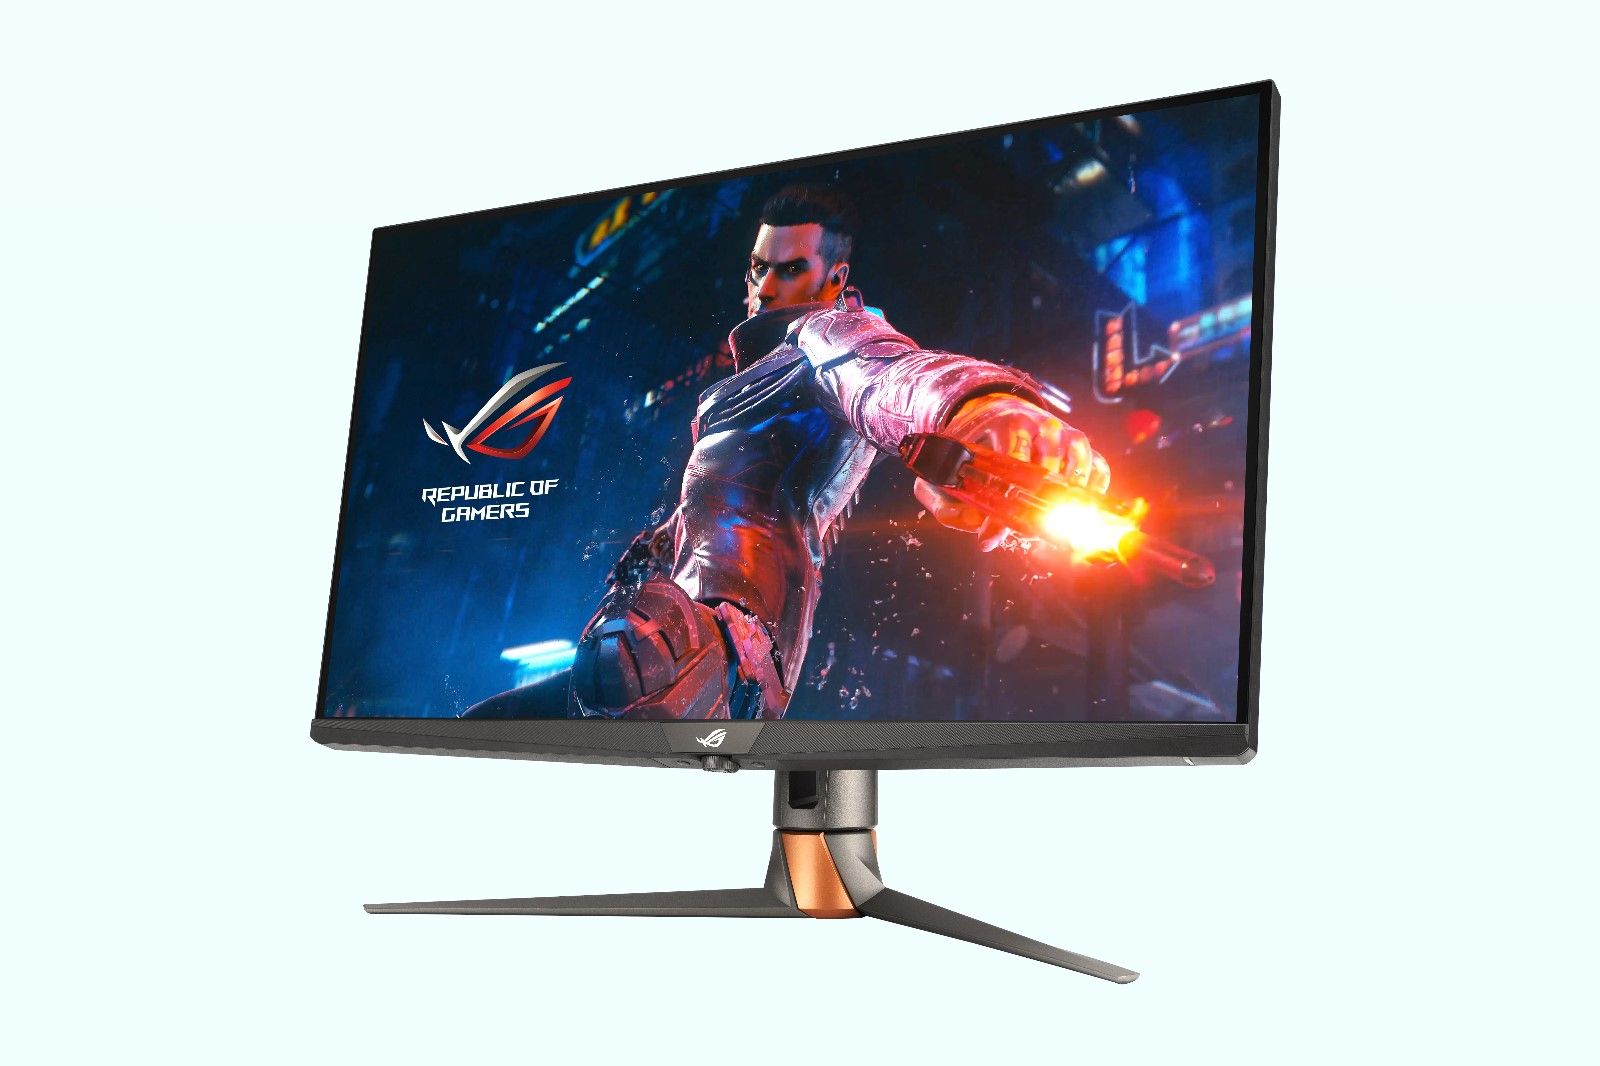 Asus gaming monitors now include an insane 540 Hz display photo 3